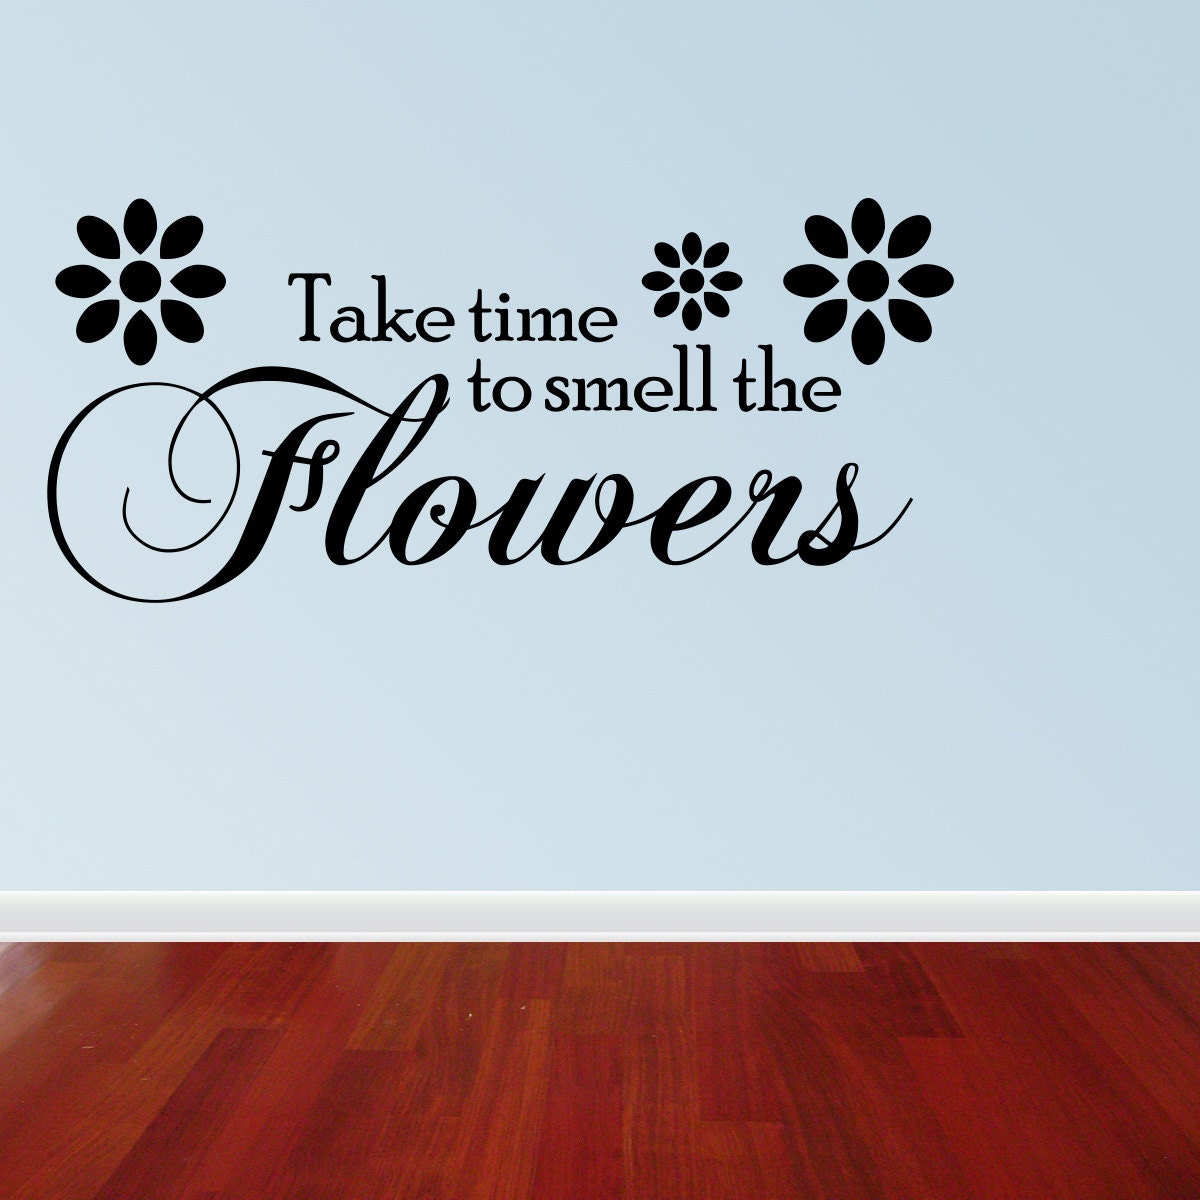 Wall Decal Quote Take Time To Smell The Flowers by vinylwordsdecor